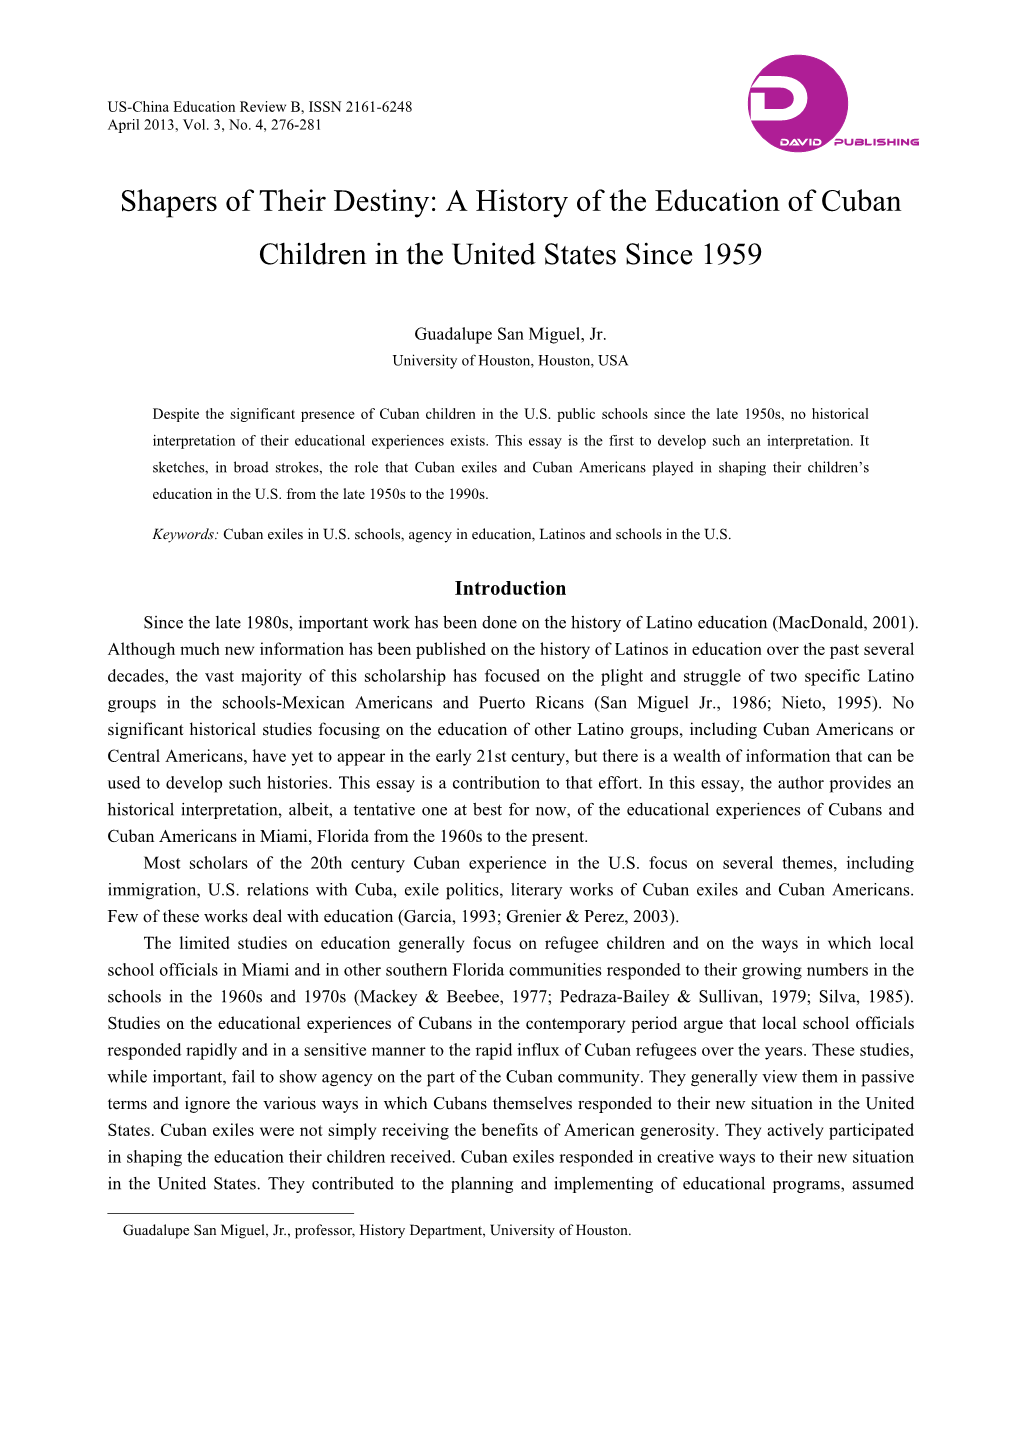 A History of the Education of Cuban Children in the United States Since 1959